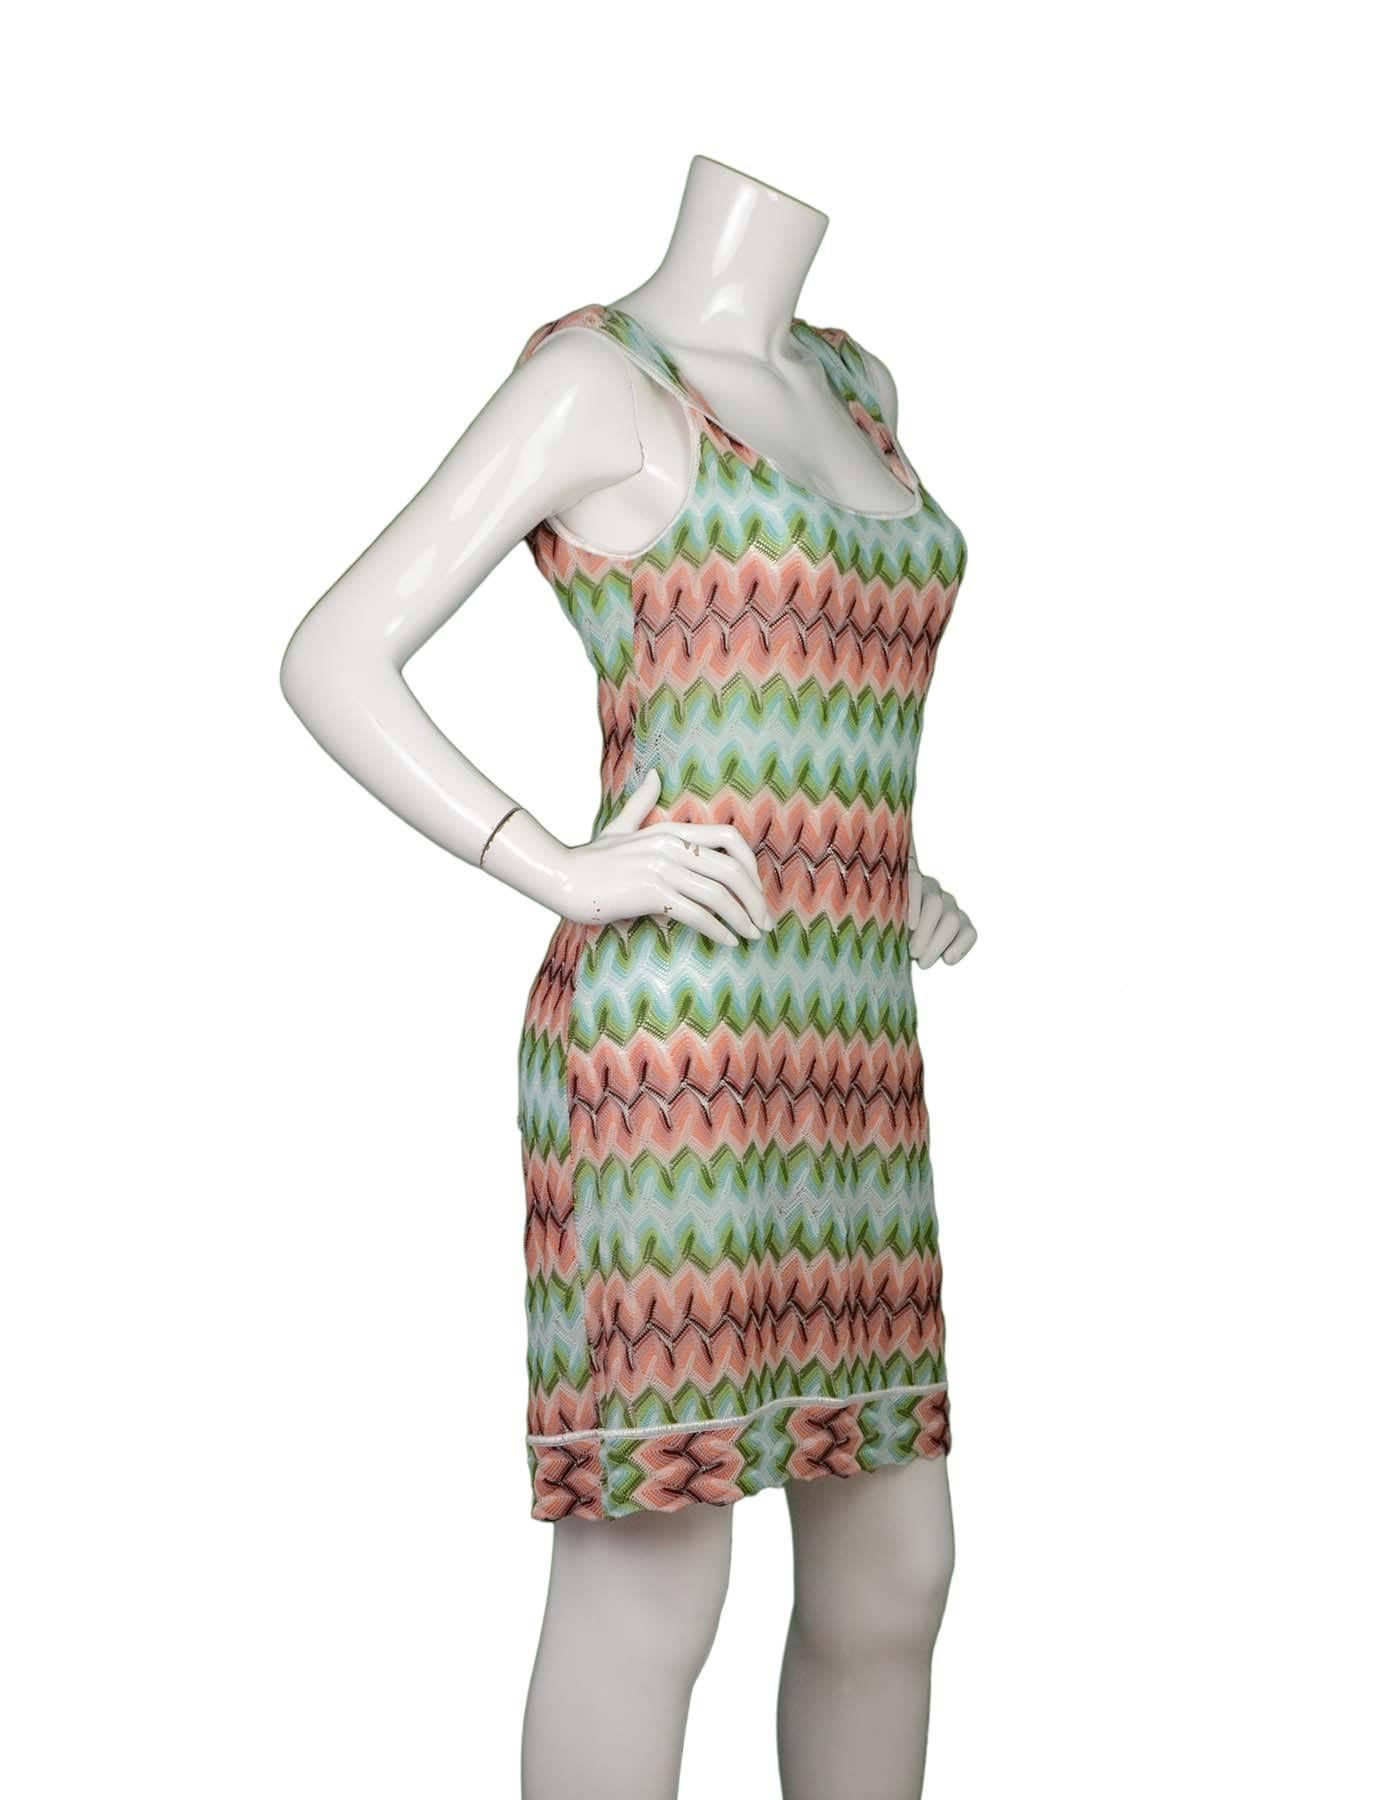 Missoni Peach & Teal Knit Sleeveless Dress 
Features twisted shoulder straps
Made In: Italy
Color: Multi-colored
Composition: 85% cotton, 15% rayon
Lining: None
Closure/Opening: Pull over
Exterior Pockets: None
Interior Pockets: